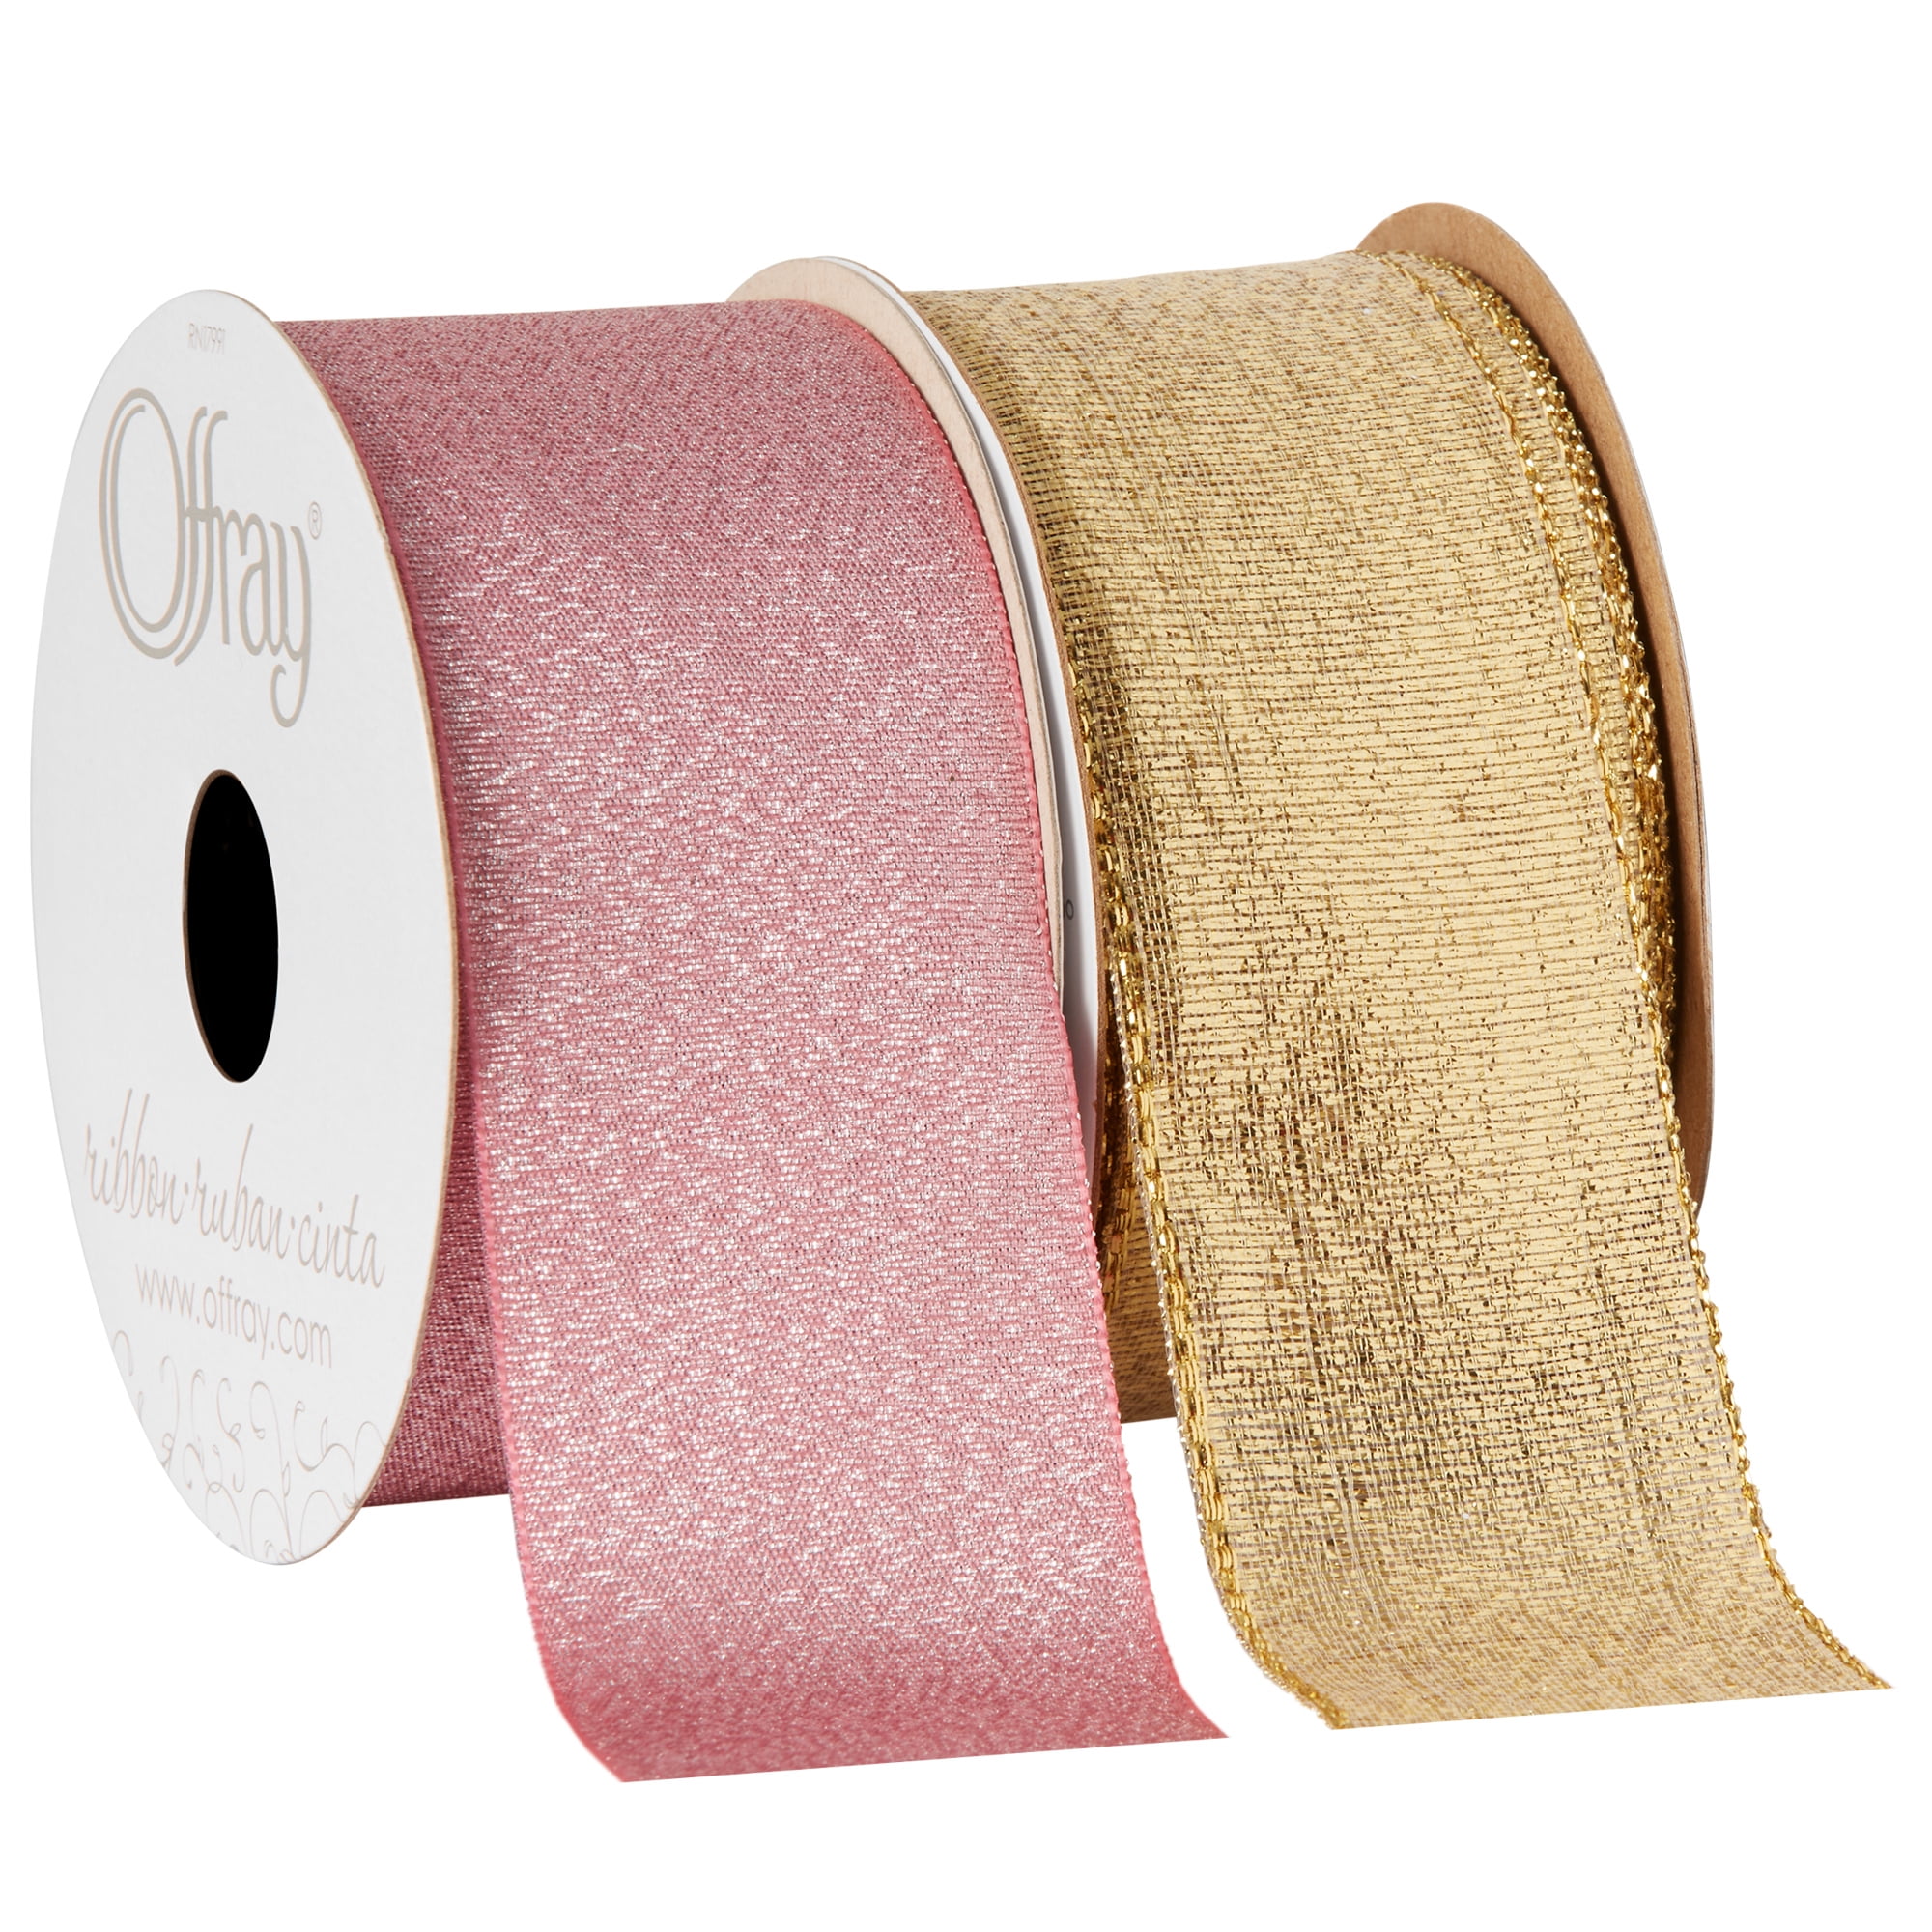 Offray 1.25 inch Pink Empire Lace Trim, 3 Yards, 1 Each